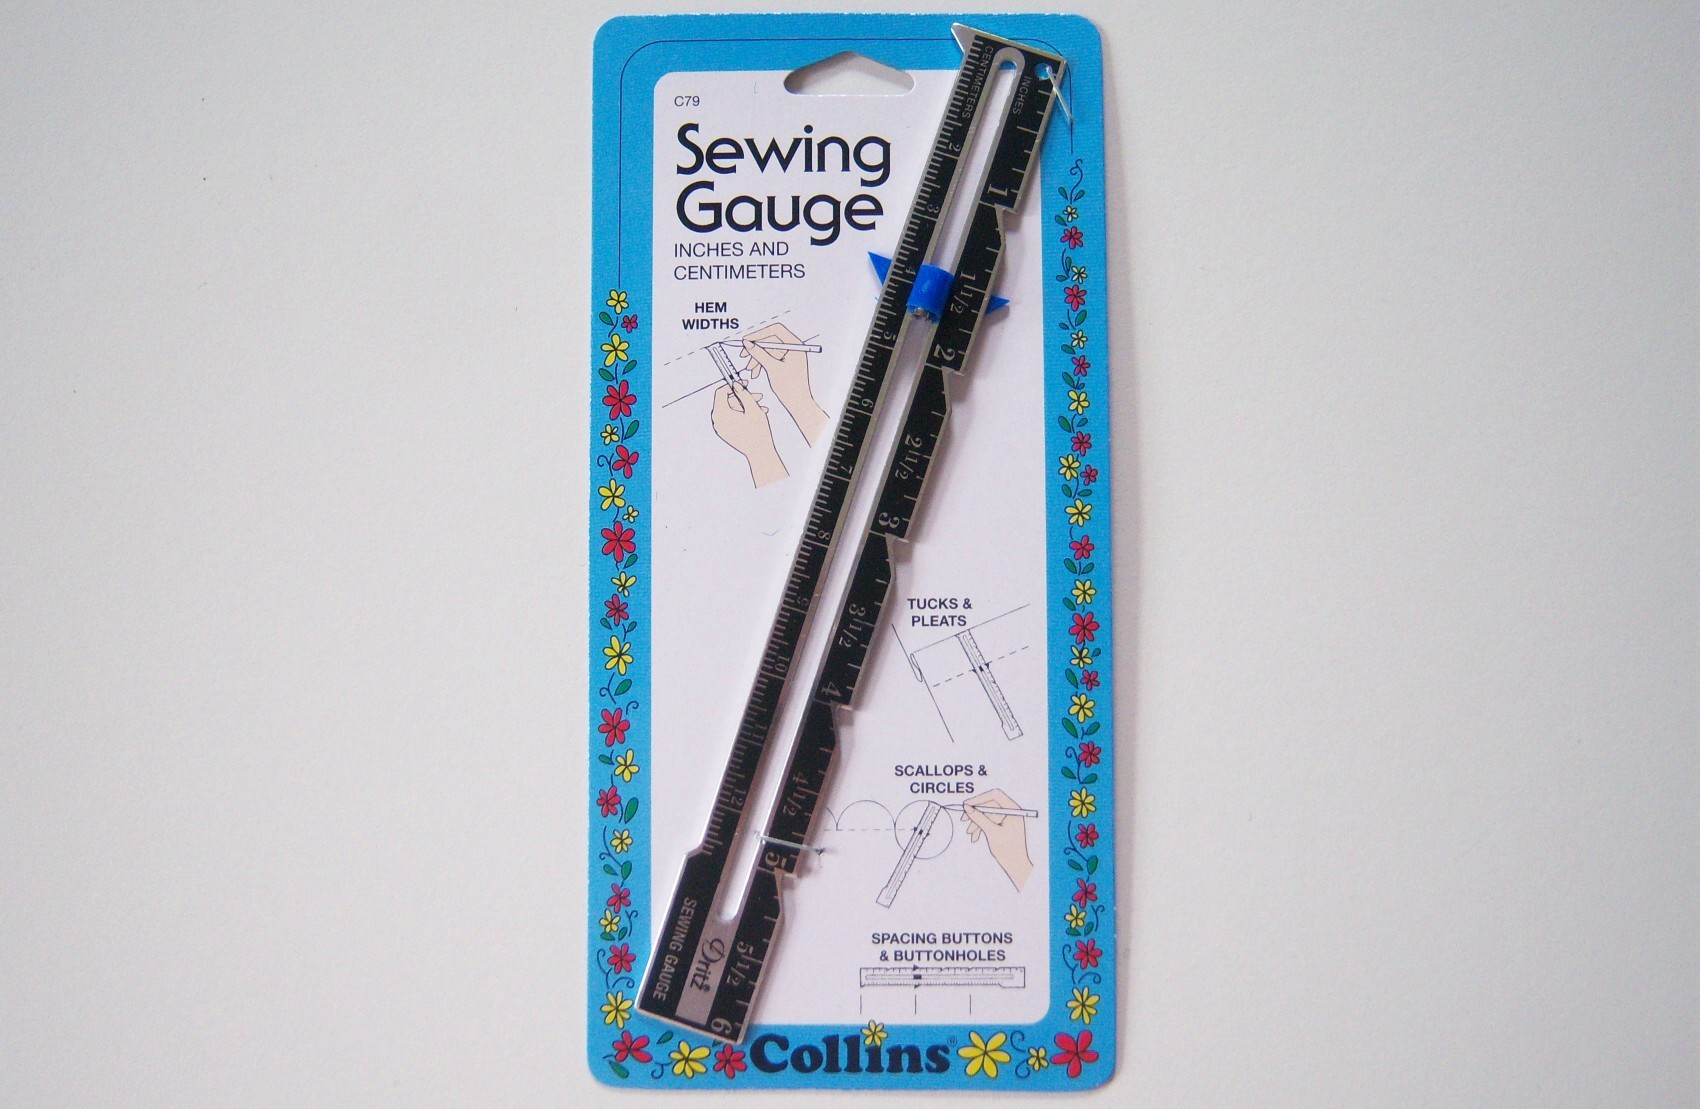 Collins 6" Sewing Guage